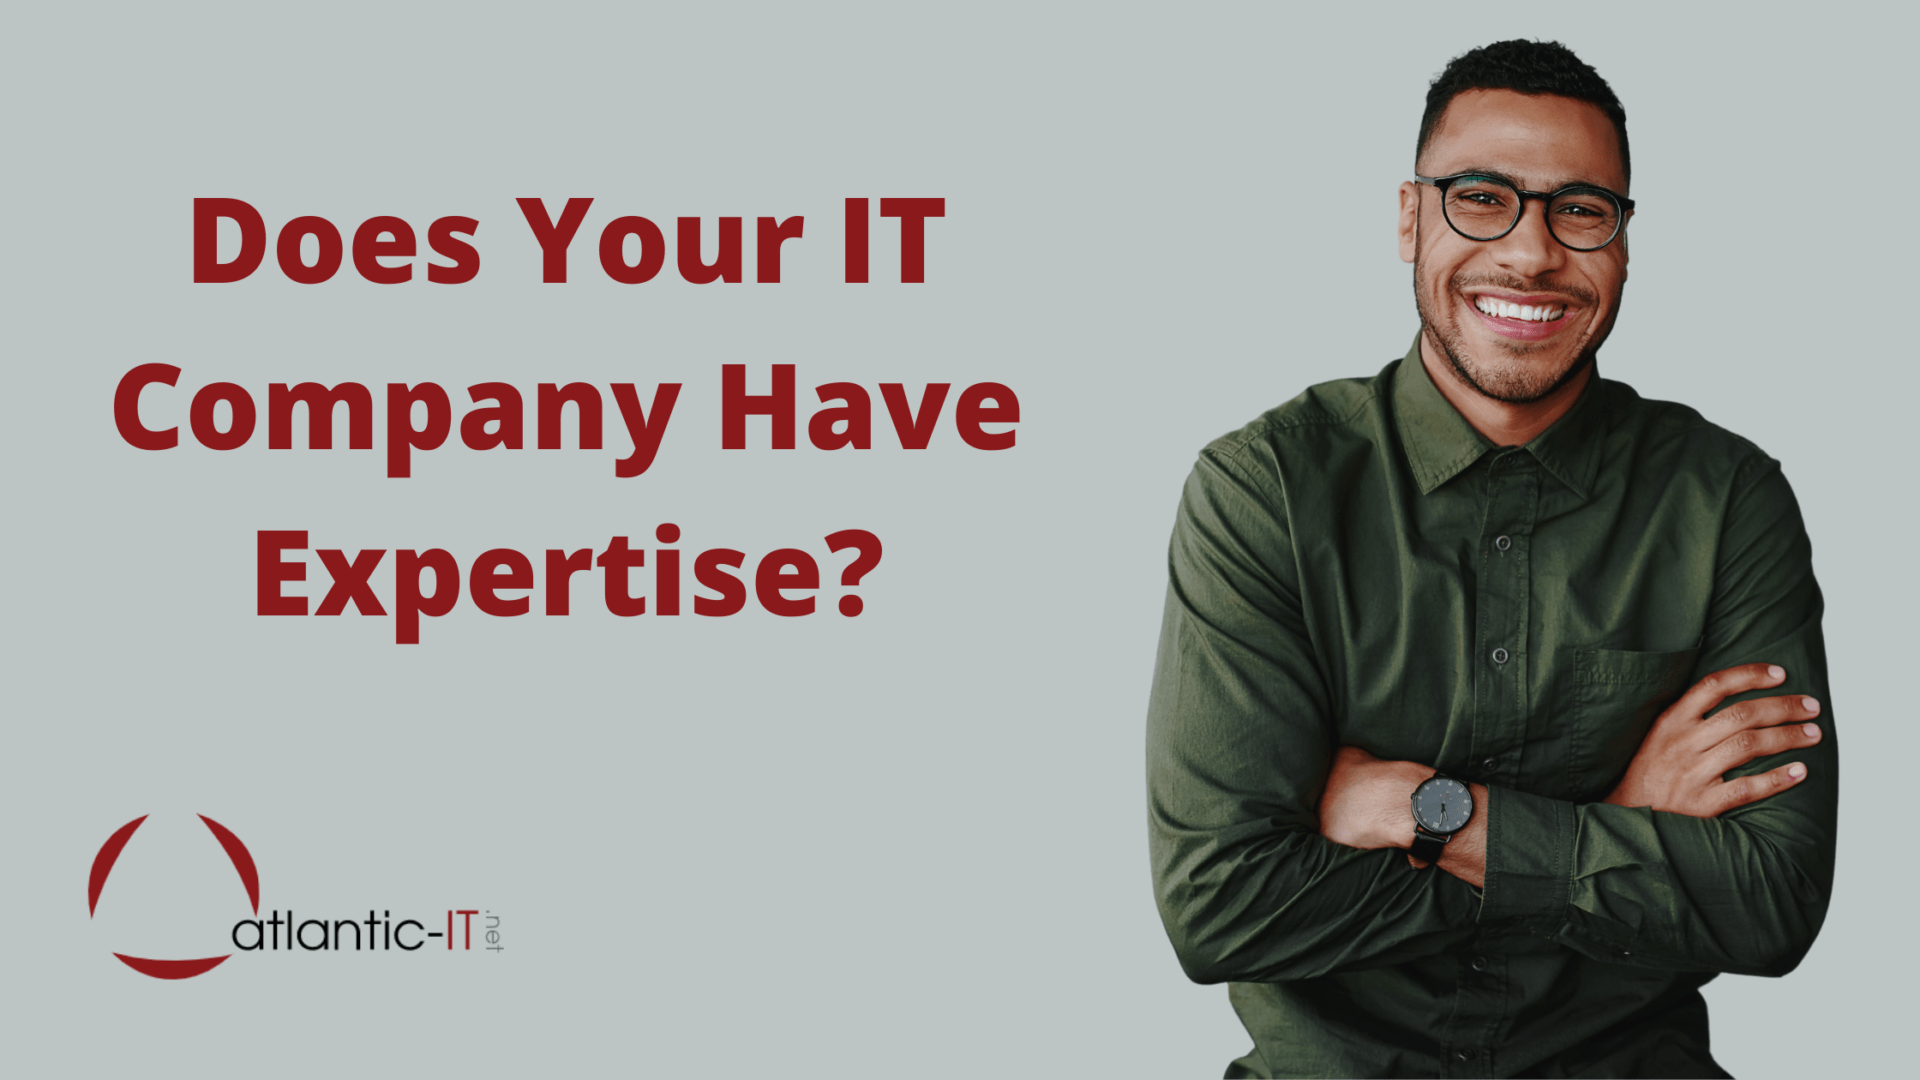 Does Your IT Company Have Expertise?